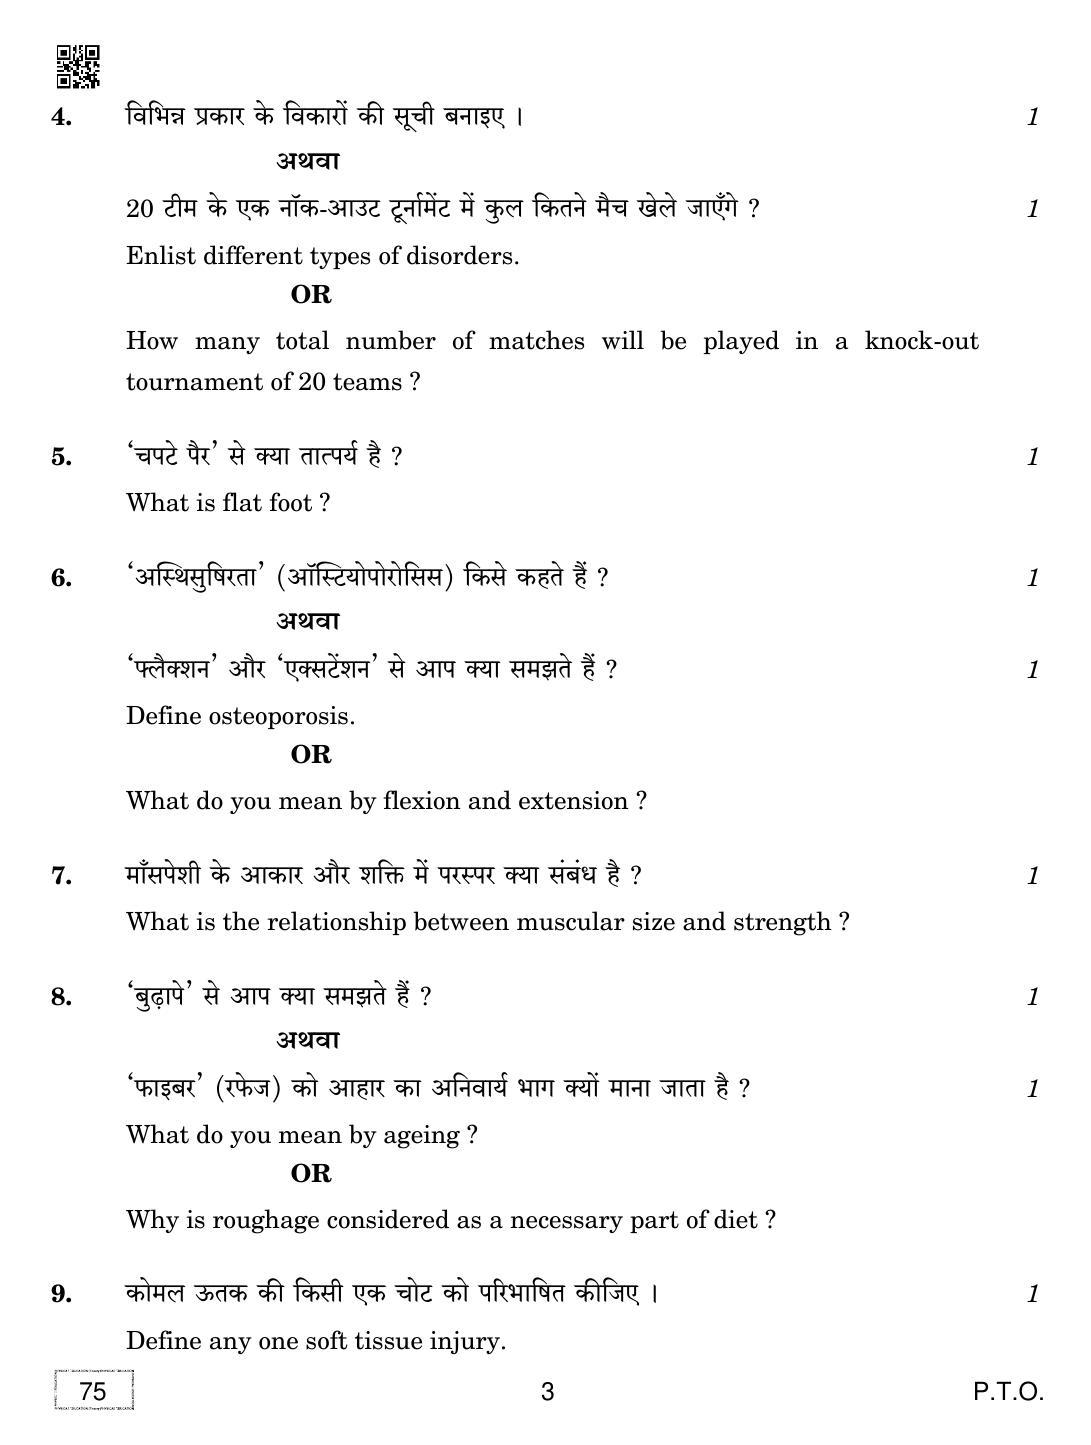 CBSE Class 12 75 PHYSICAL EDUCATION 2019 Compartment Question Paper - Page 3